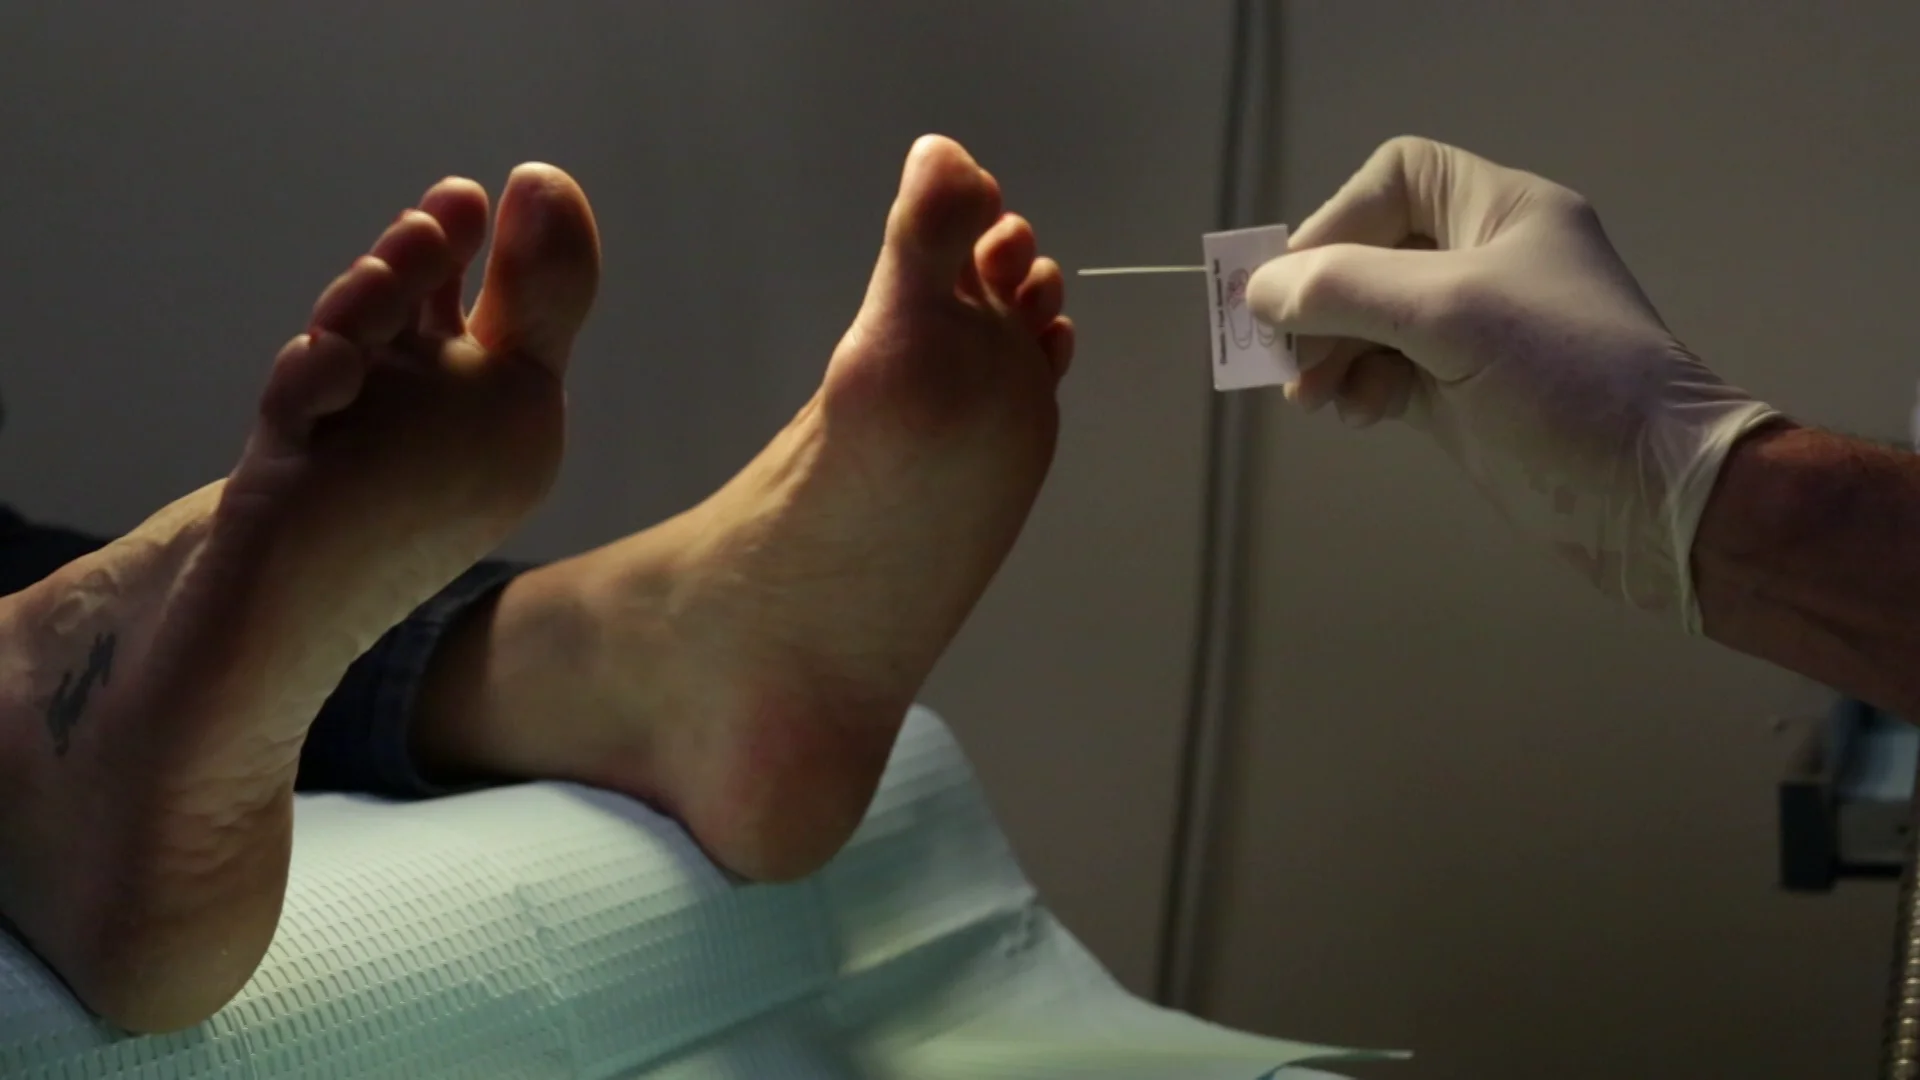 Monofilament Assessment of the Foot - OSCE Guide, Clip, UKMLA